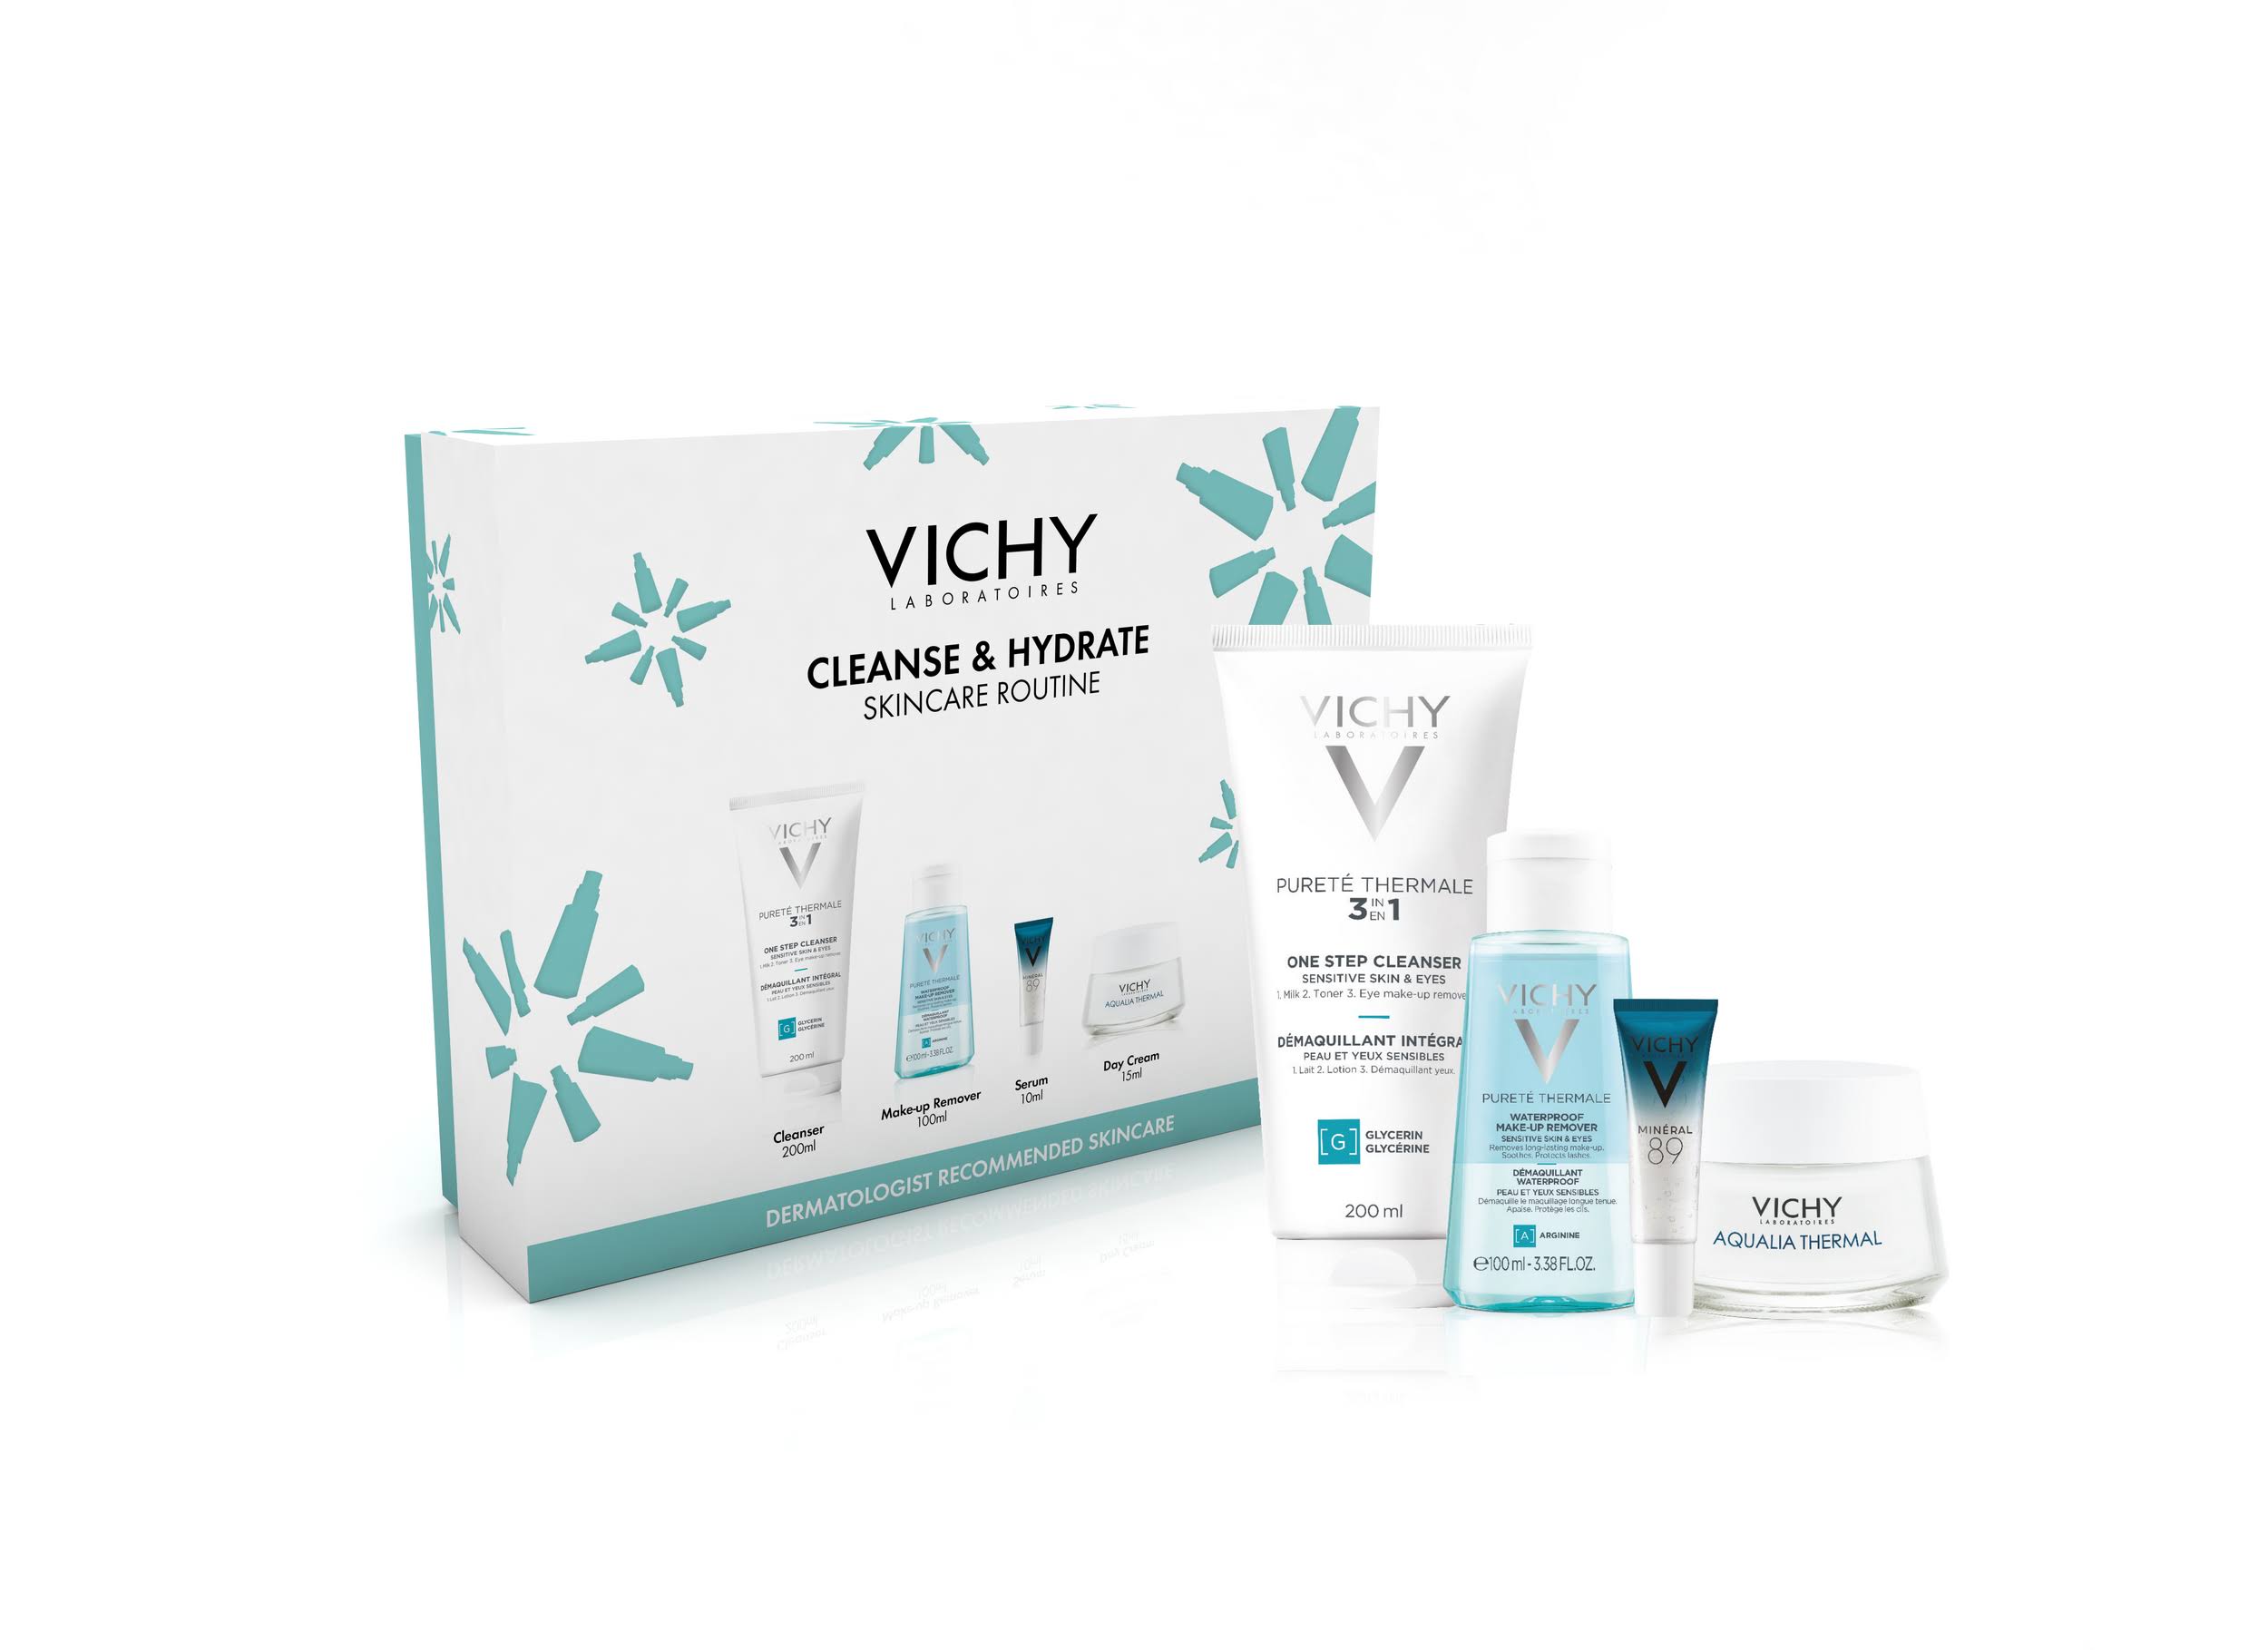 Vichy Cleanse & Hydrate Skincare Routine Gift Set